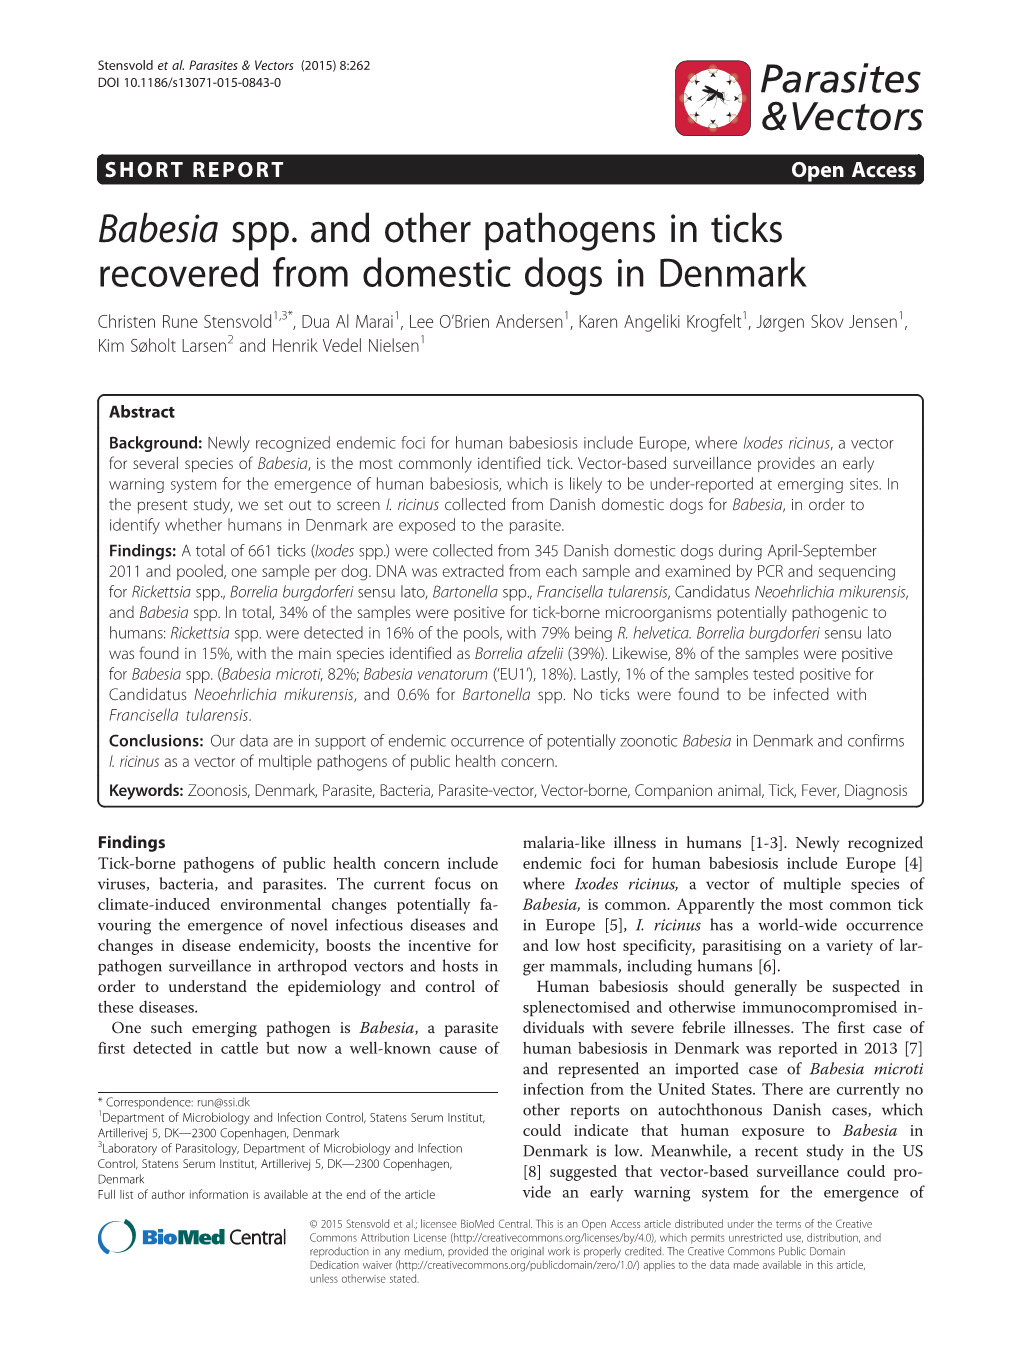 Babesia Spp. and Other Pathogens in Ticks Recovered from Domestic Dogs